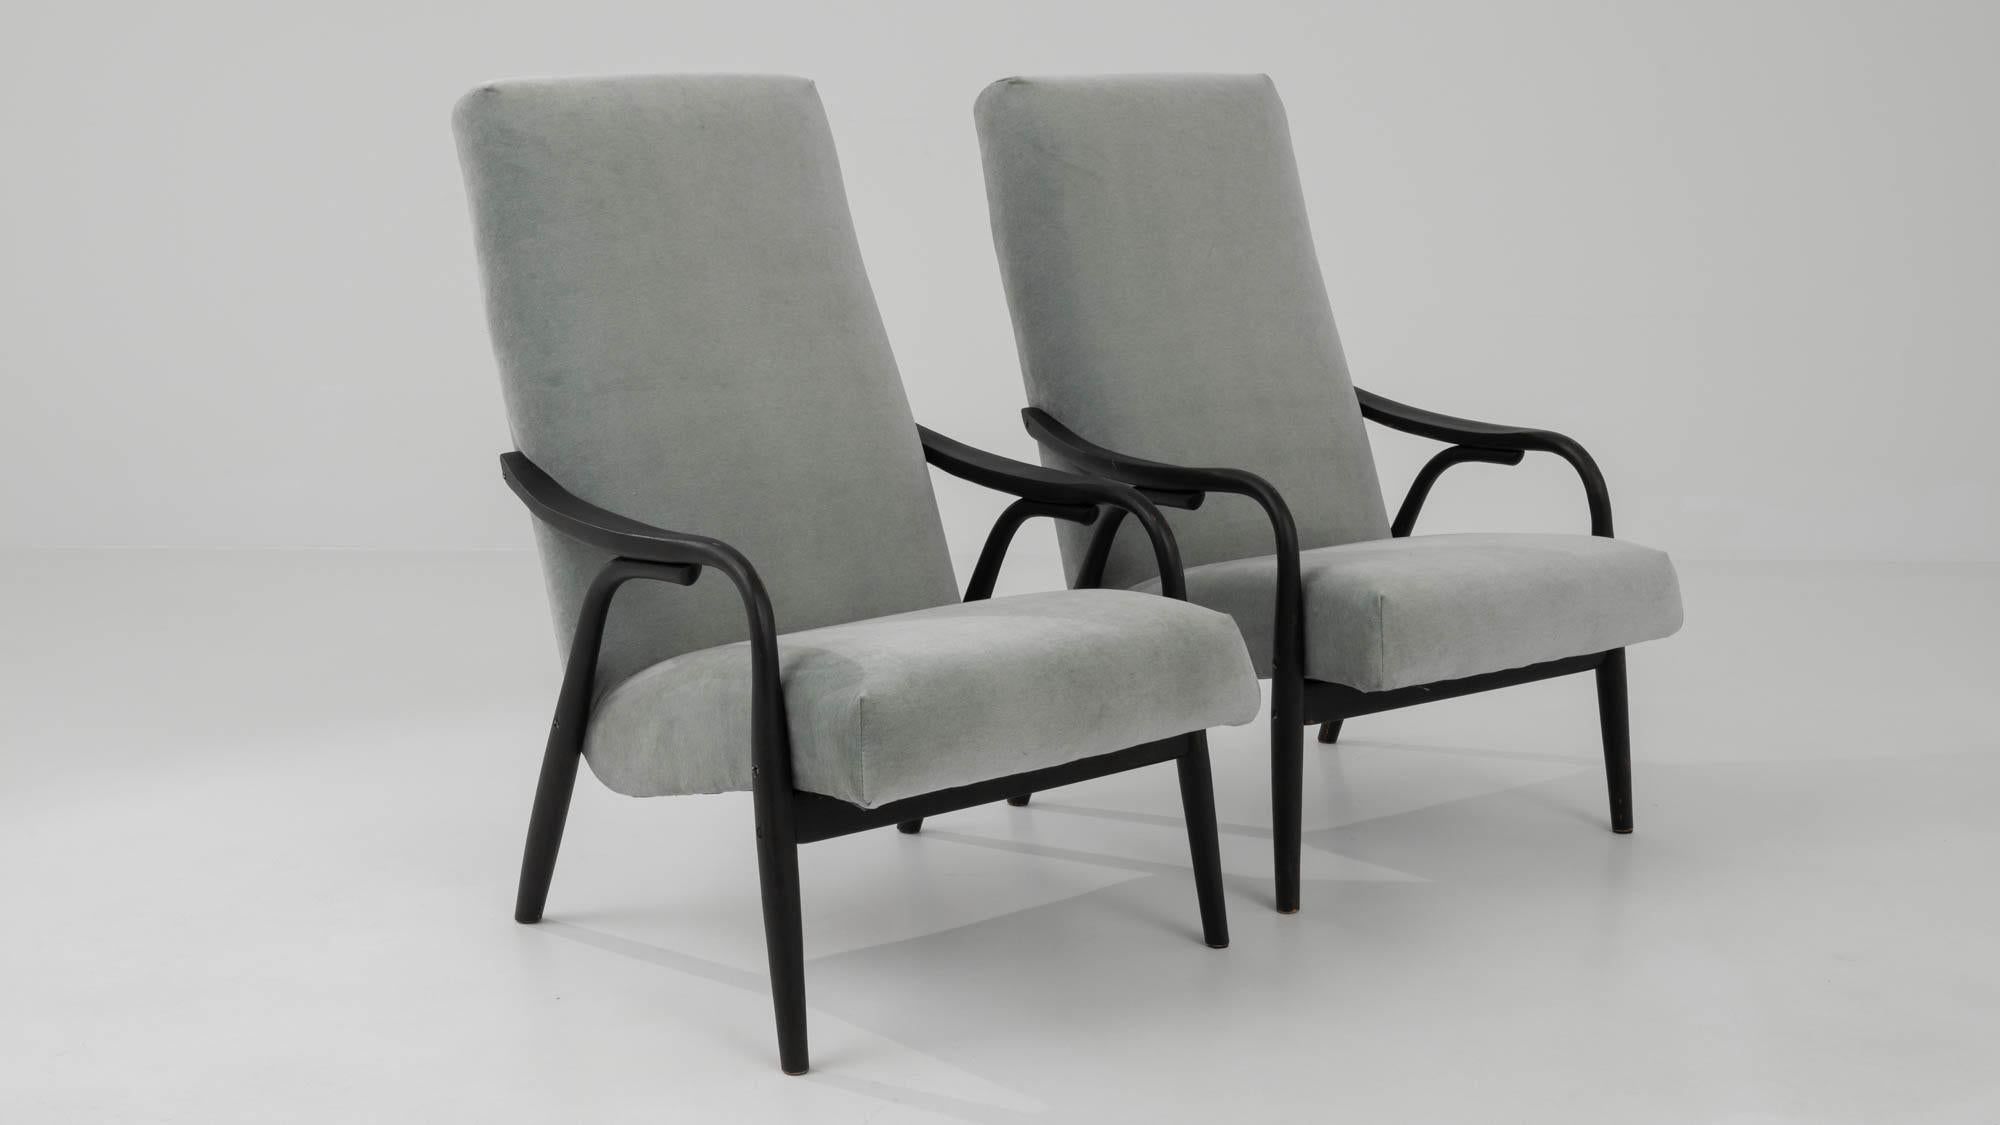 1960s Czech Upholstered Armchairs By Ton, a Pair For Sale 5